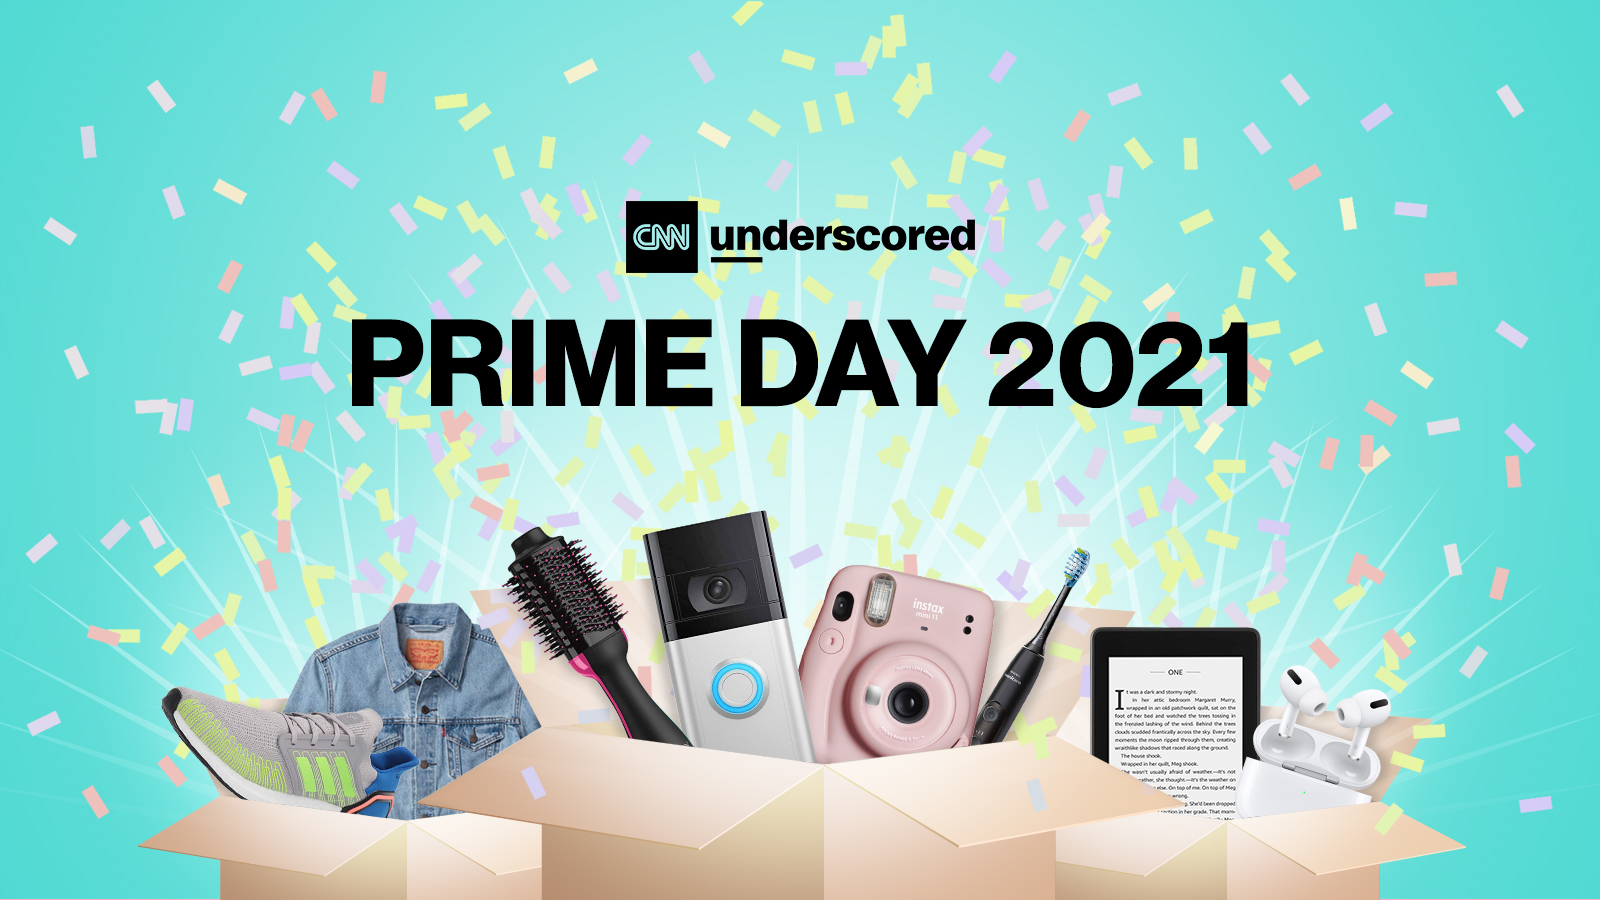 Prime Day 2021 Oi0jdmjgmhipm Here's what you need to know to get